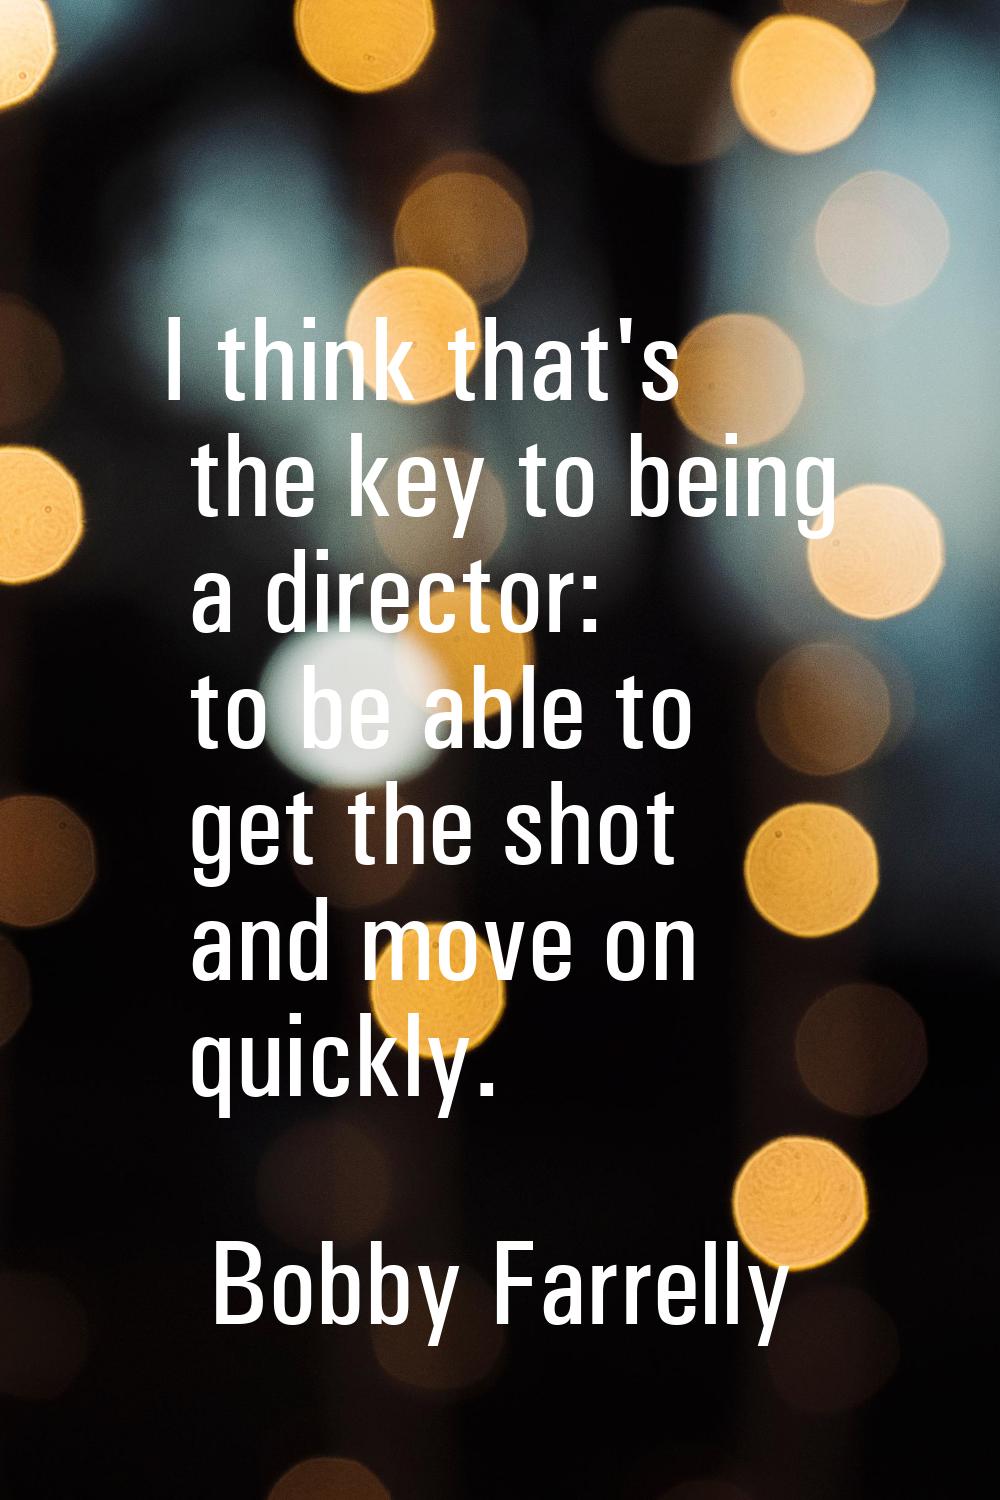 I think that's the key to being a director: to be able to get the shot and move on quickly.